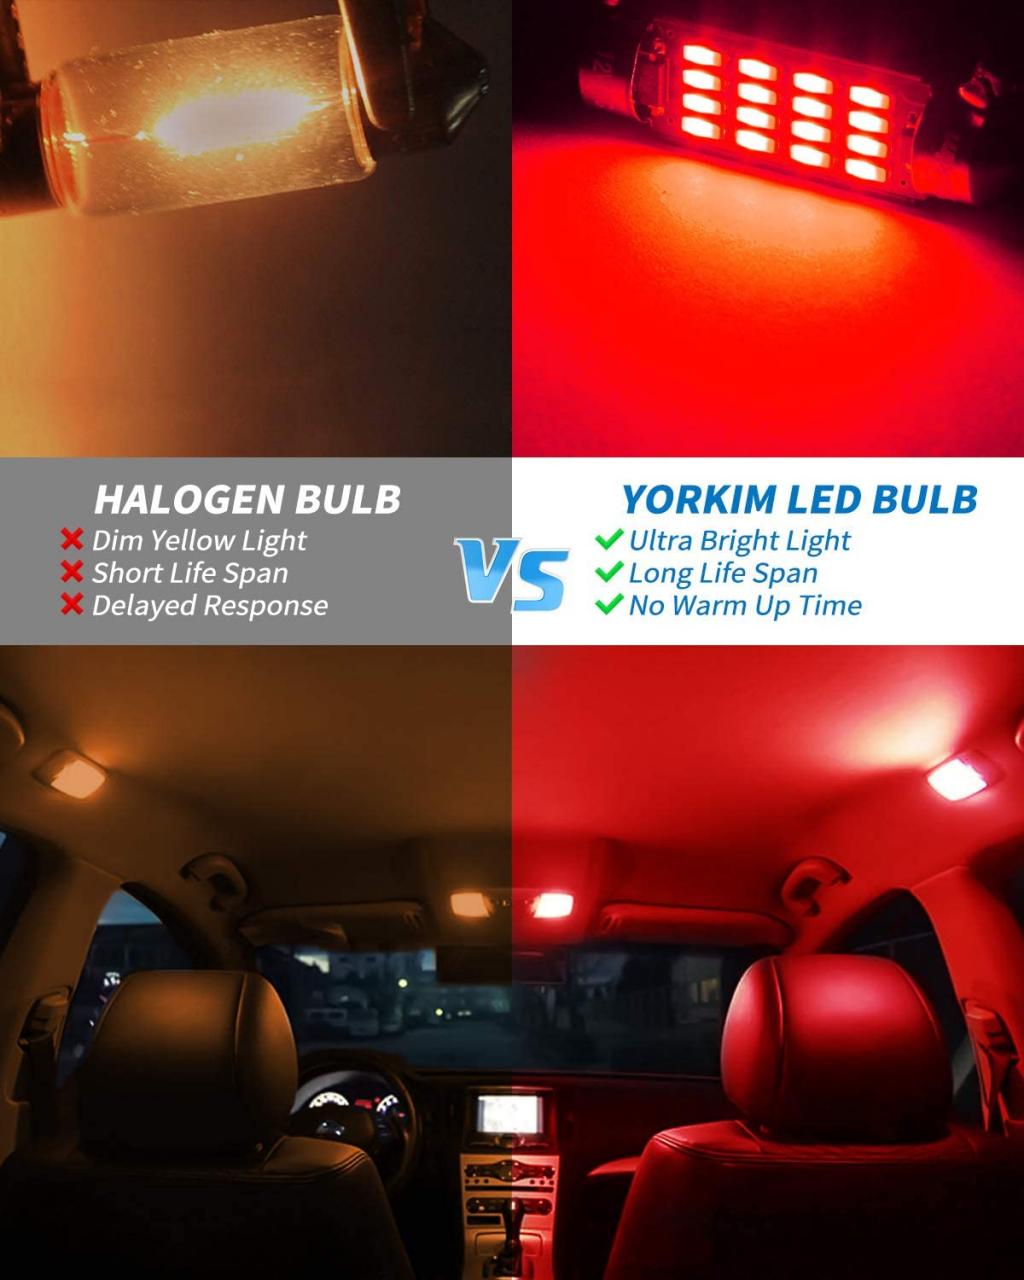 Buy Yorkim Super Bright 578 Festoon LED Bulb Red 41mm 42mm LED Bulb Canbus  Error Free 16-SMD 4014 Chipset, 212-2 Dome Light Led, LED Interior Light  MAP Light 211-2 LED Bulb, Pack